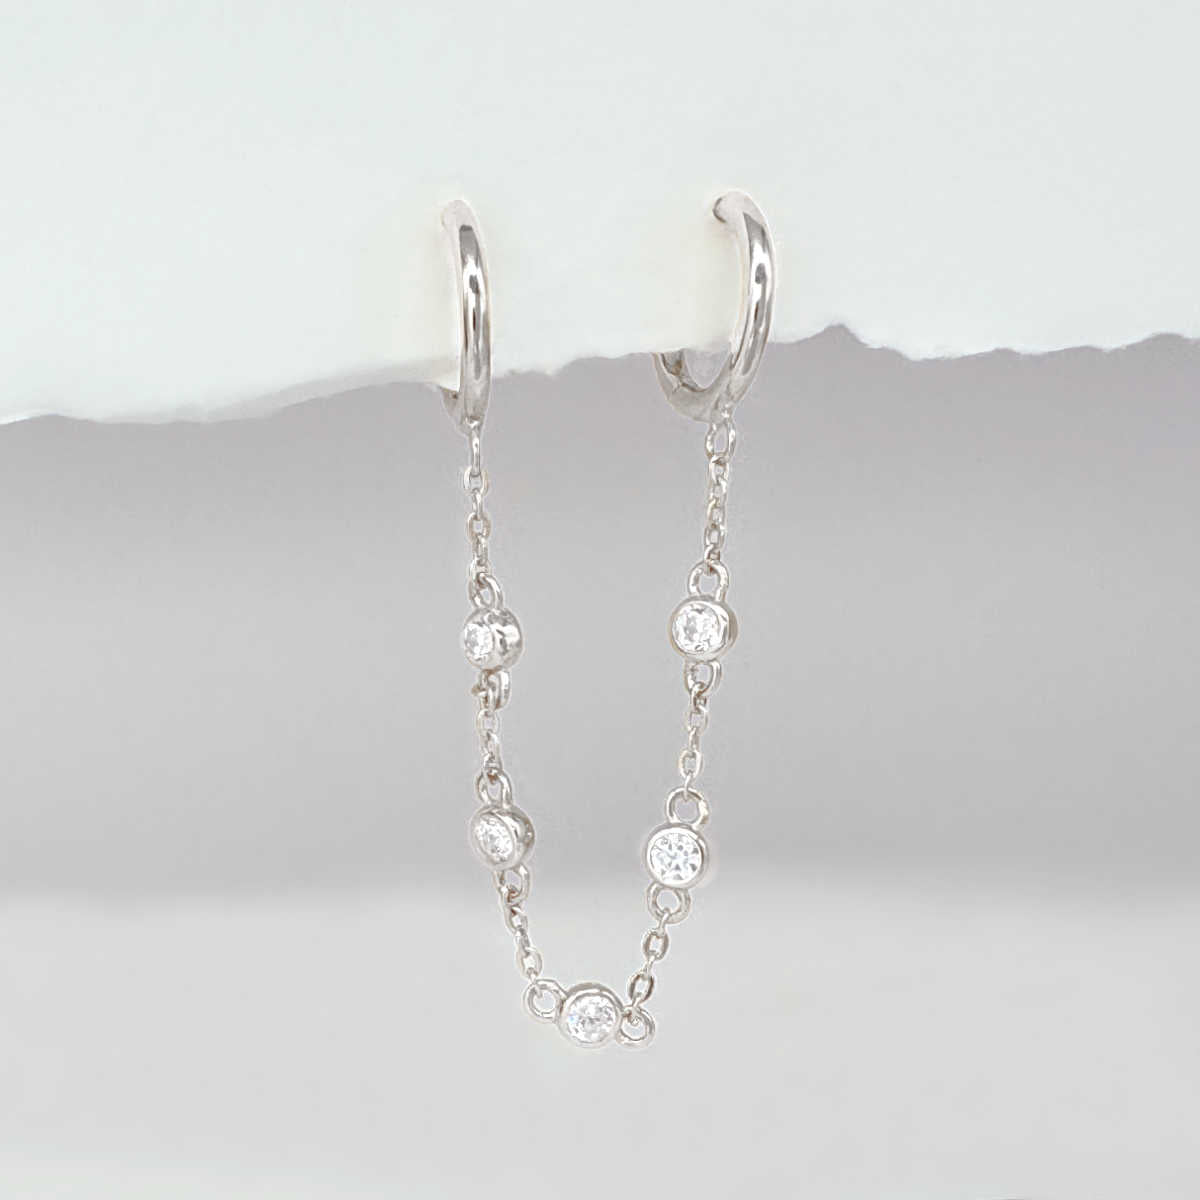 White Gold Connected Hoops, Diamond by the Yard Style Double Piercing Earring from Two of Most